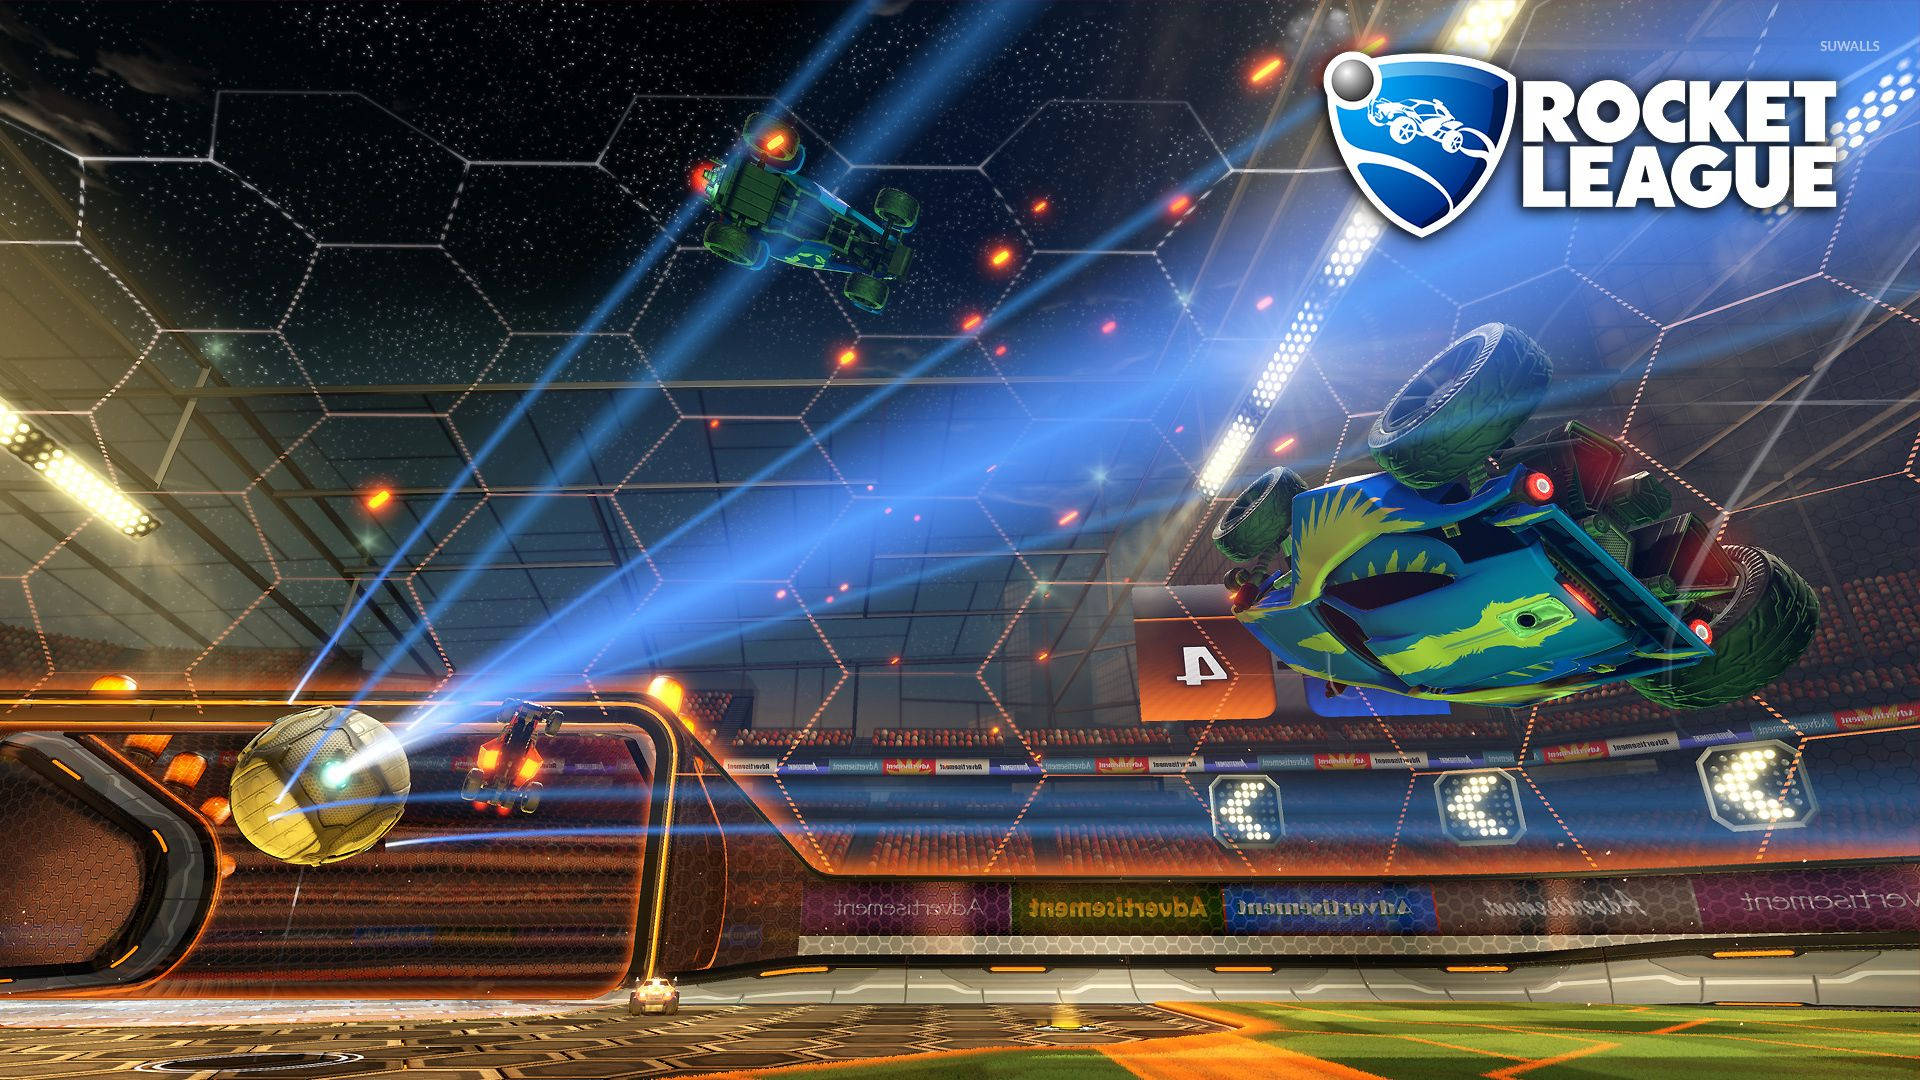 Cool Hd Rocket League Arena Background